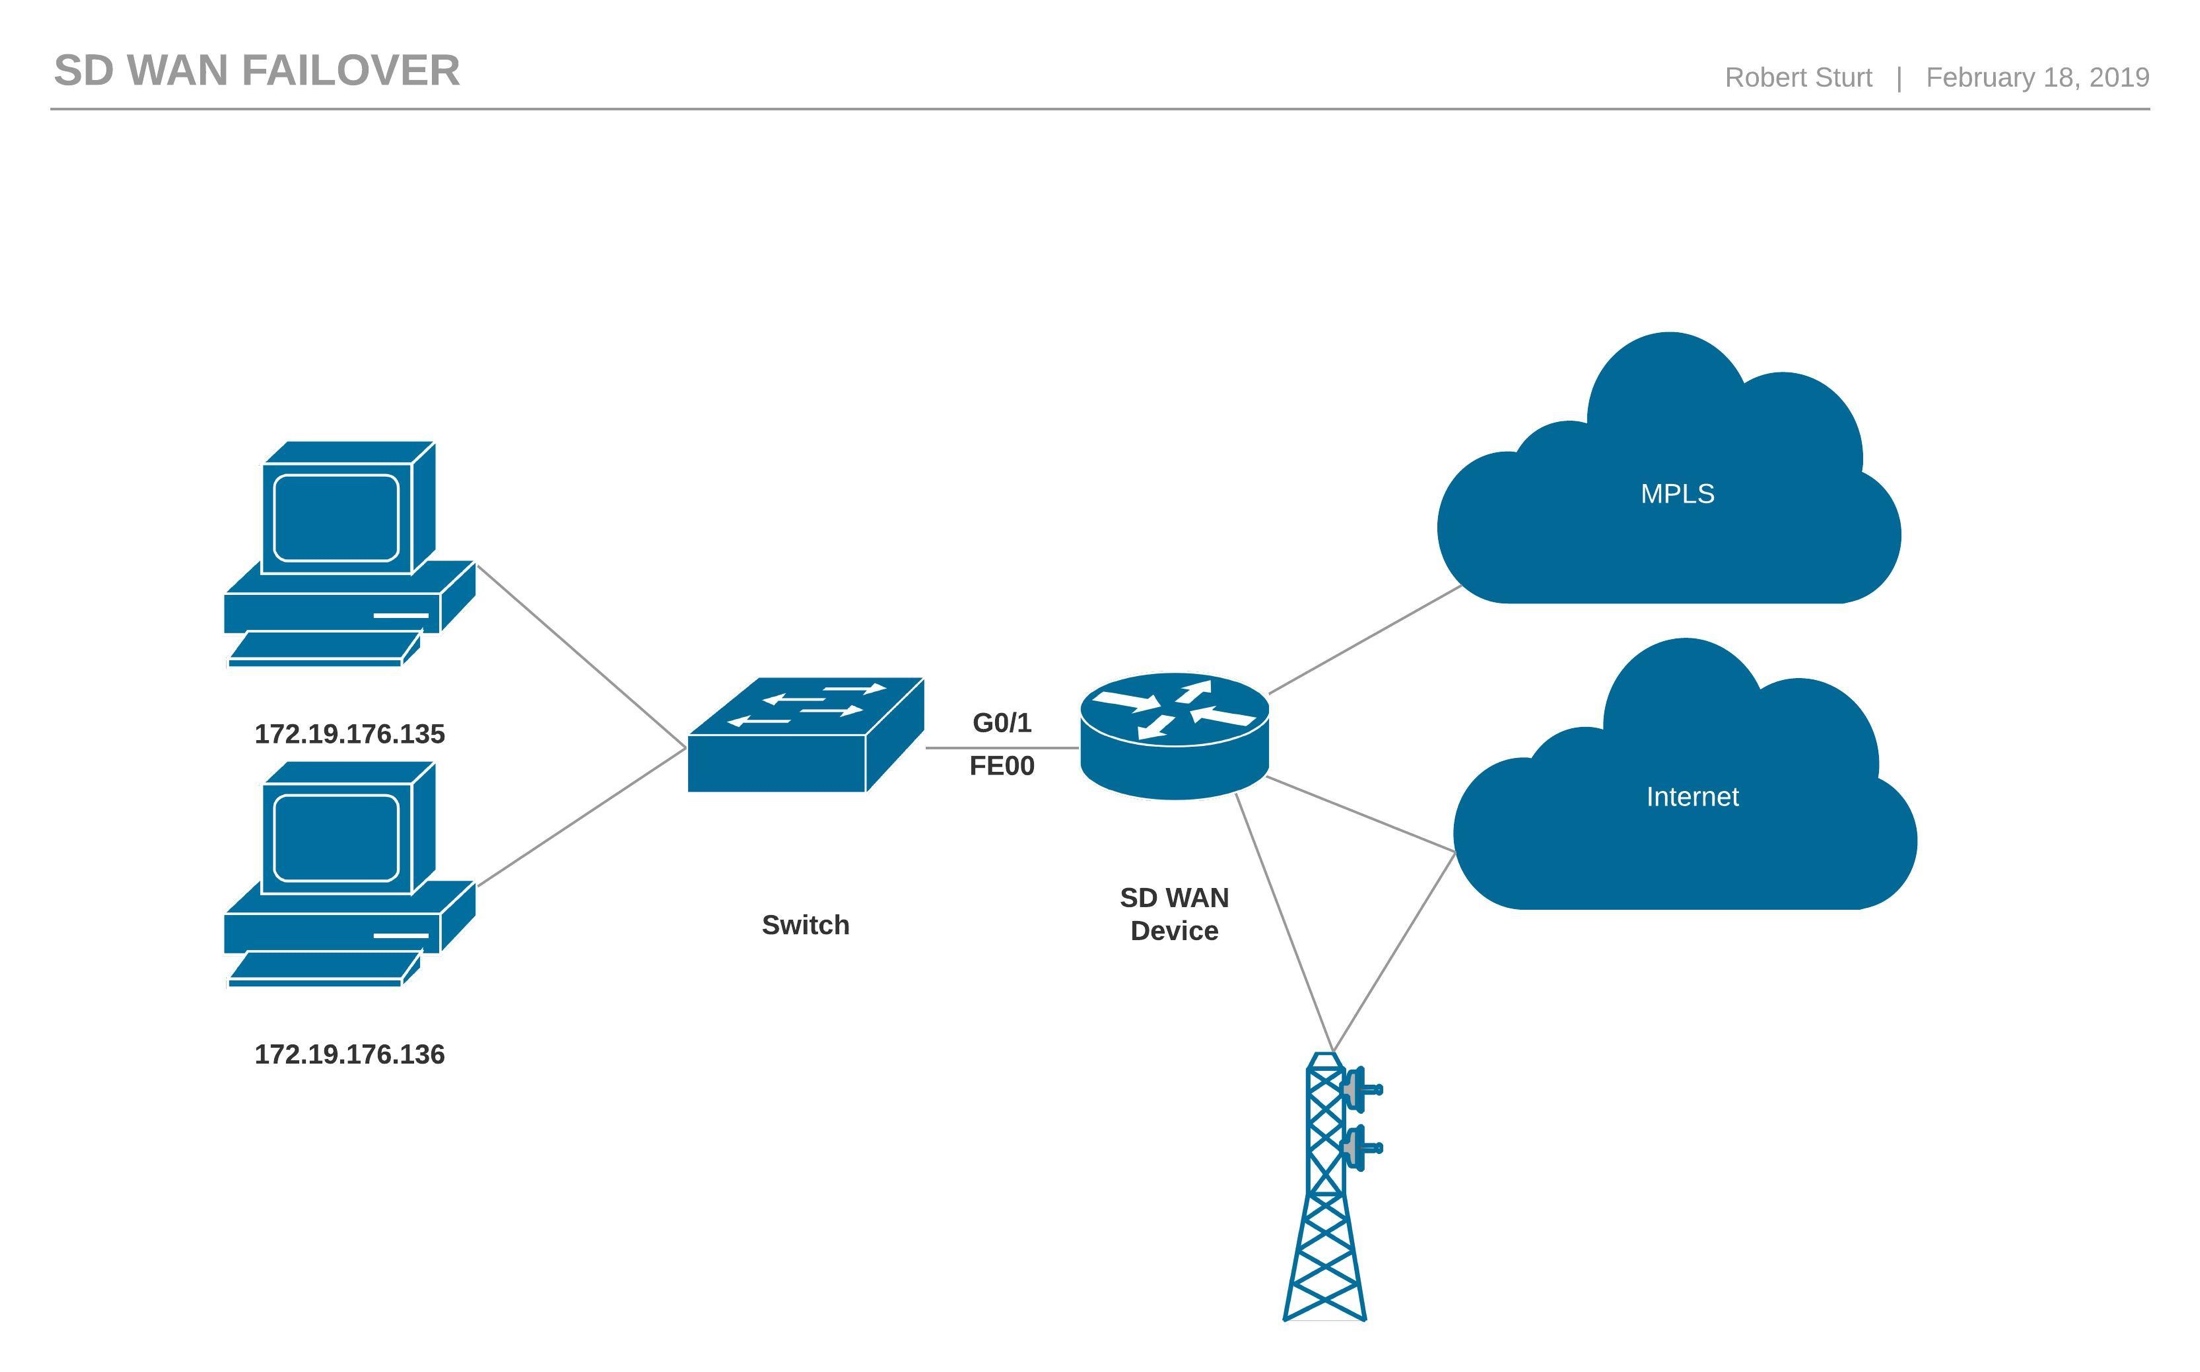 What are the advantages & disadvantages of an SD WAN?